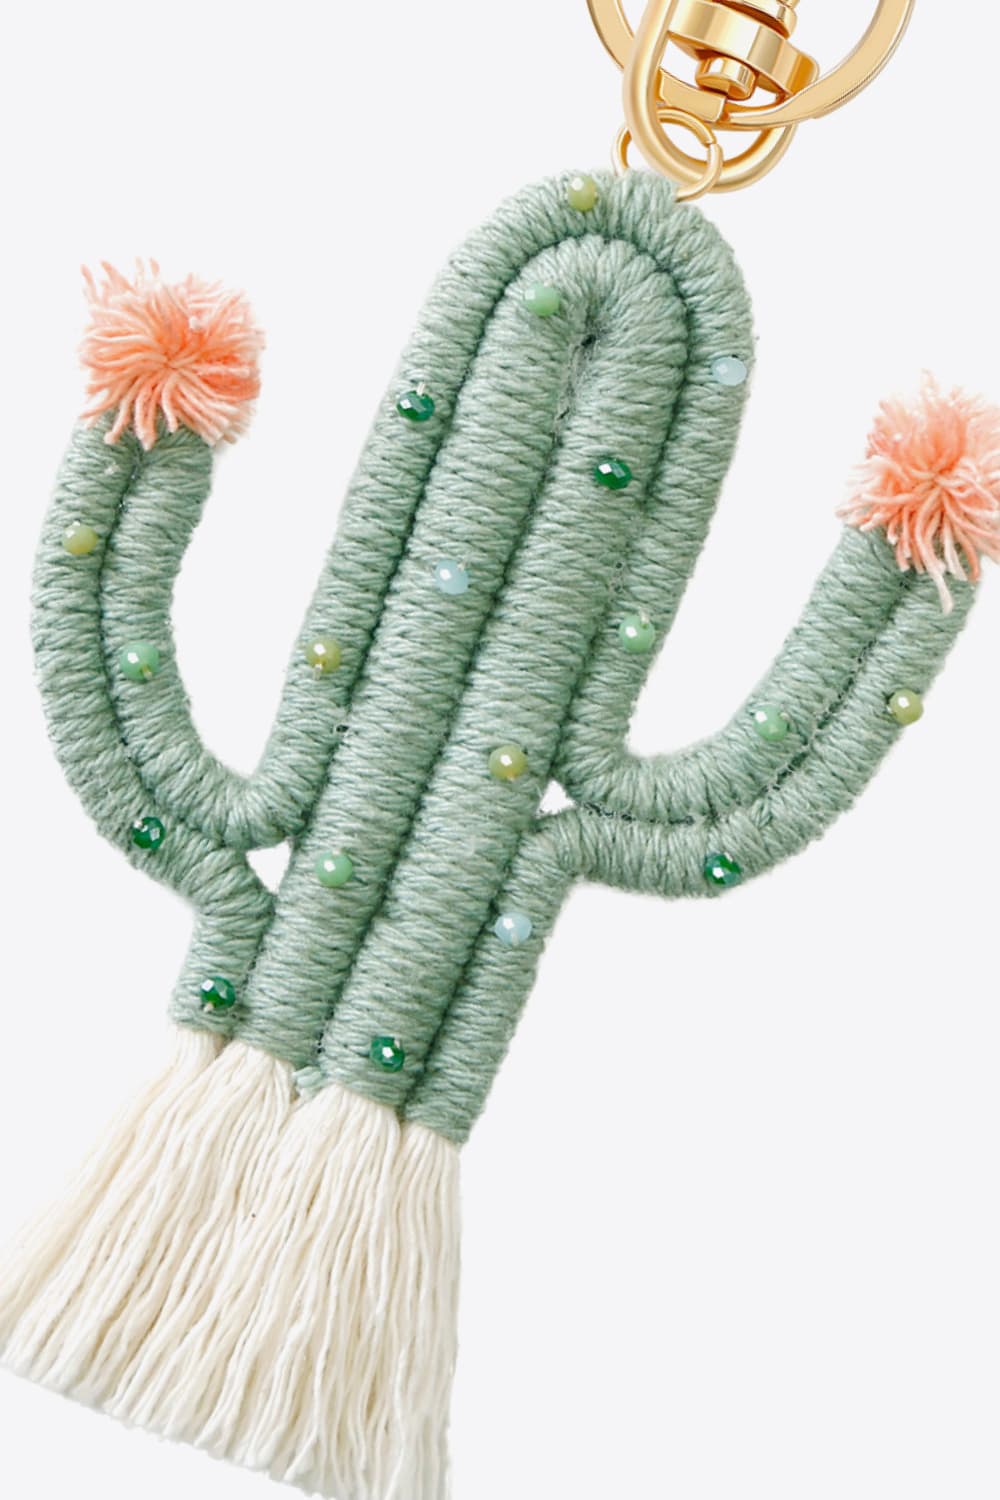 Trendsi Cupid Beauty Supplies Keychains Bead Trim Cactus Keychain with Fringe